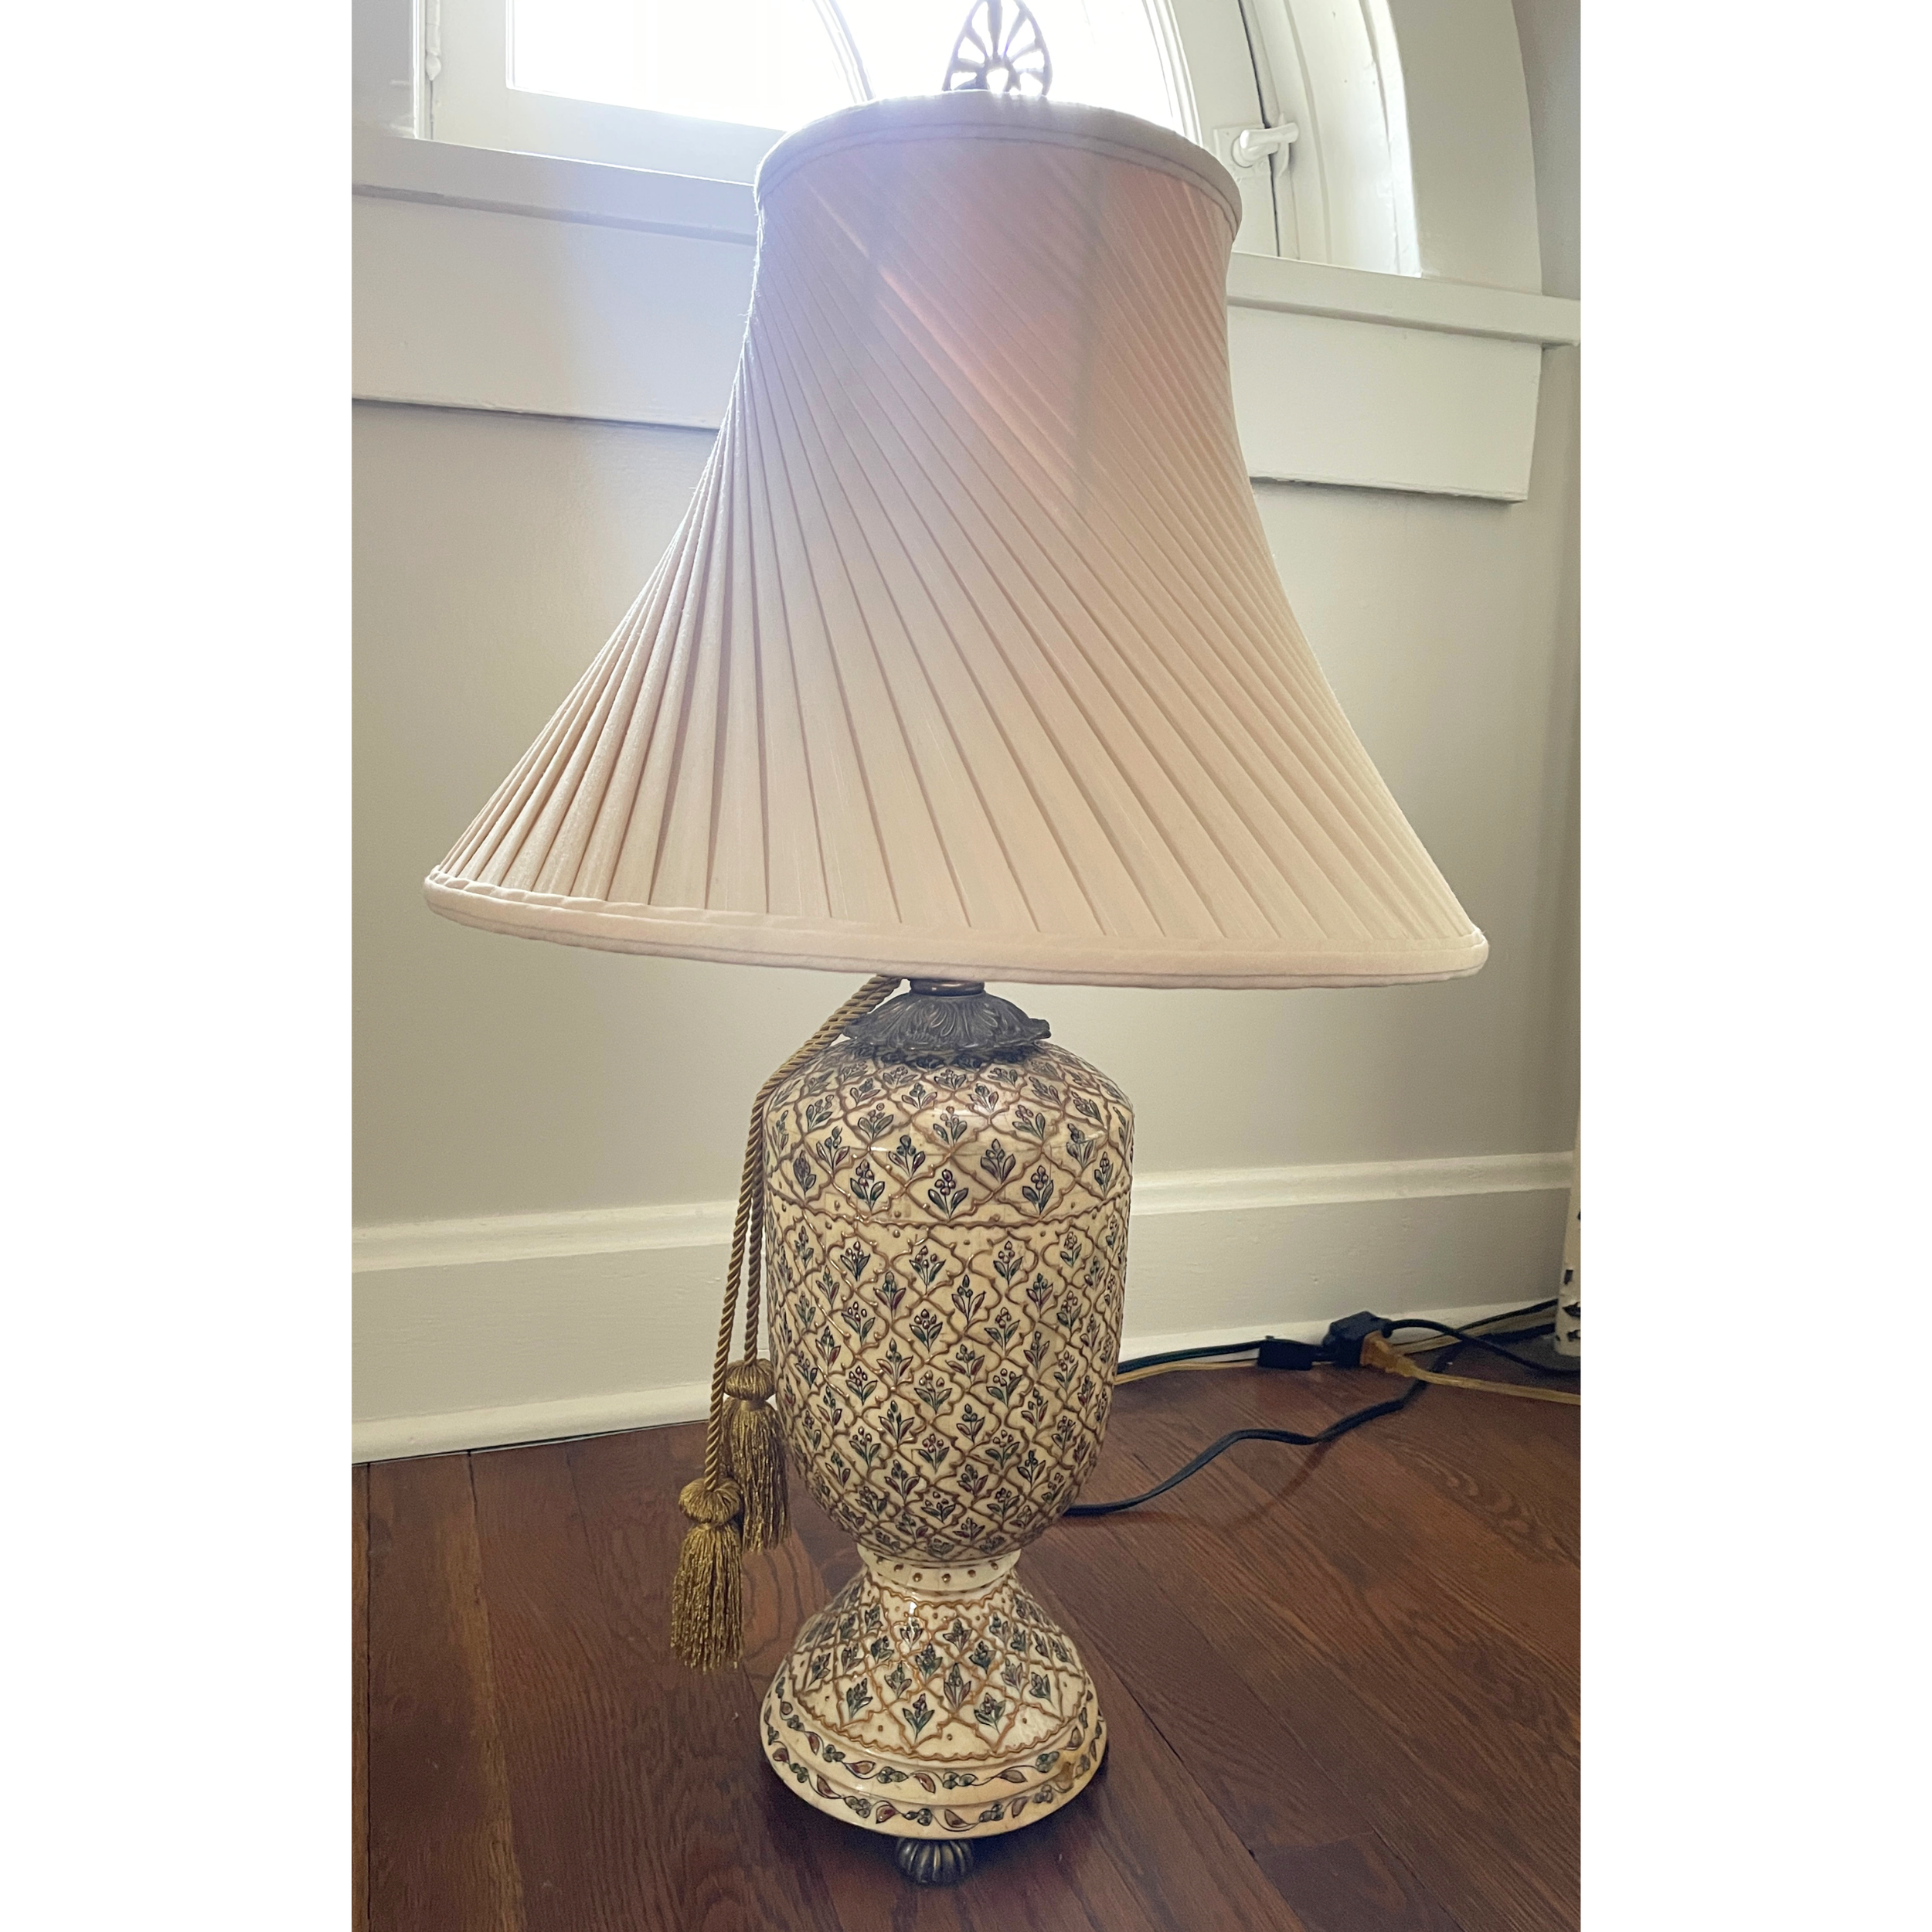 Patterned Lamp